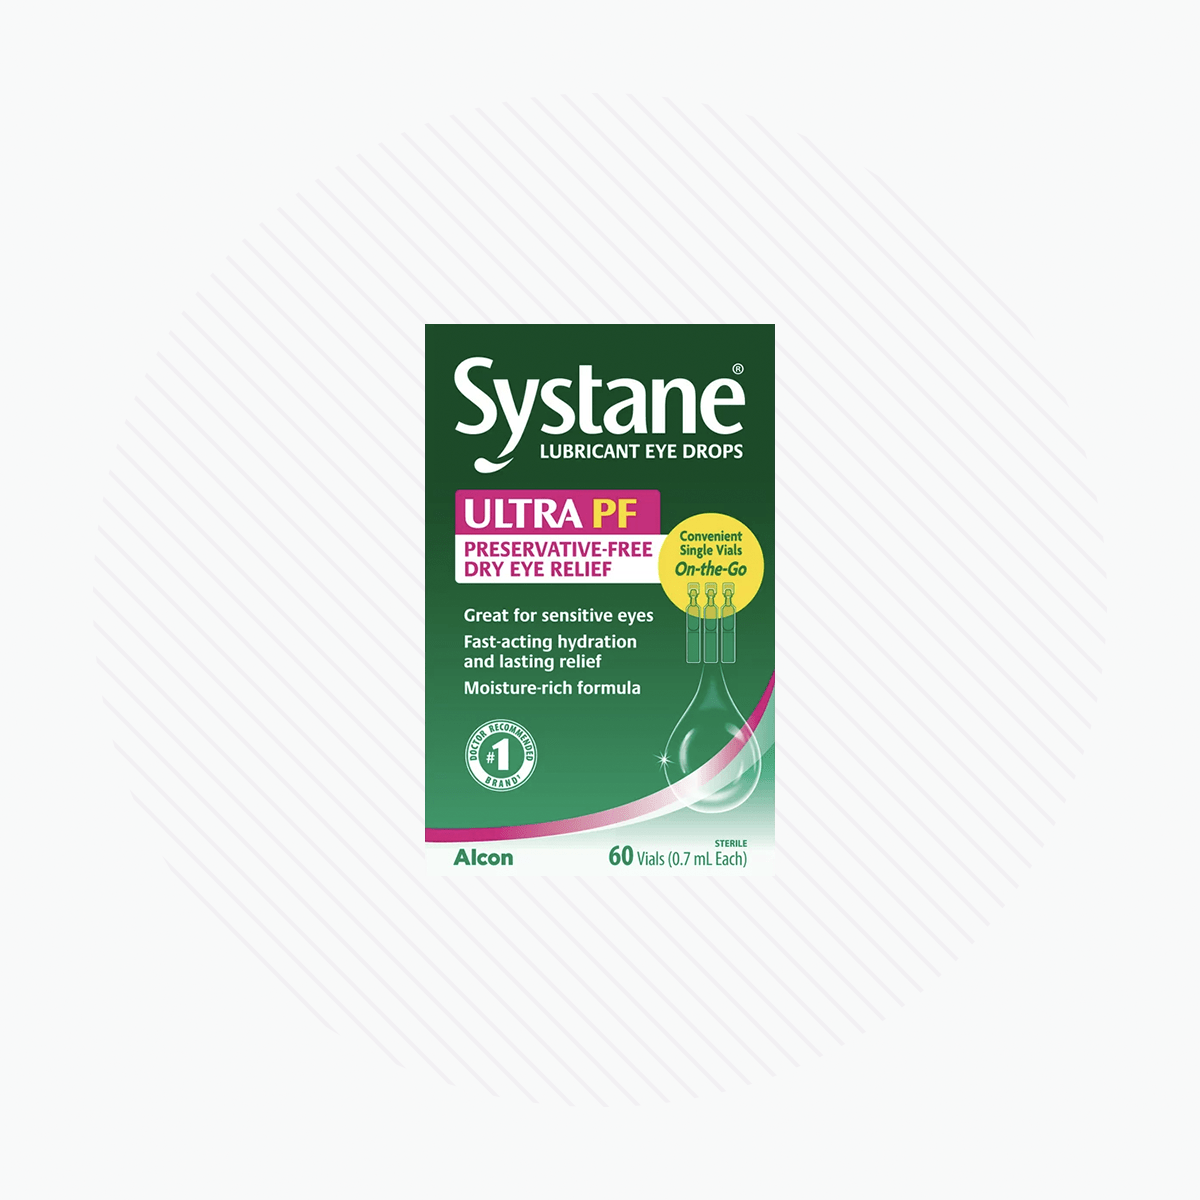 Systane Ultra PF Preservative Free Dry Eye Relief for Sensitive Eyes (60 Vials) - Dryeye Rescue